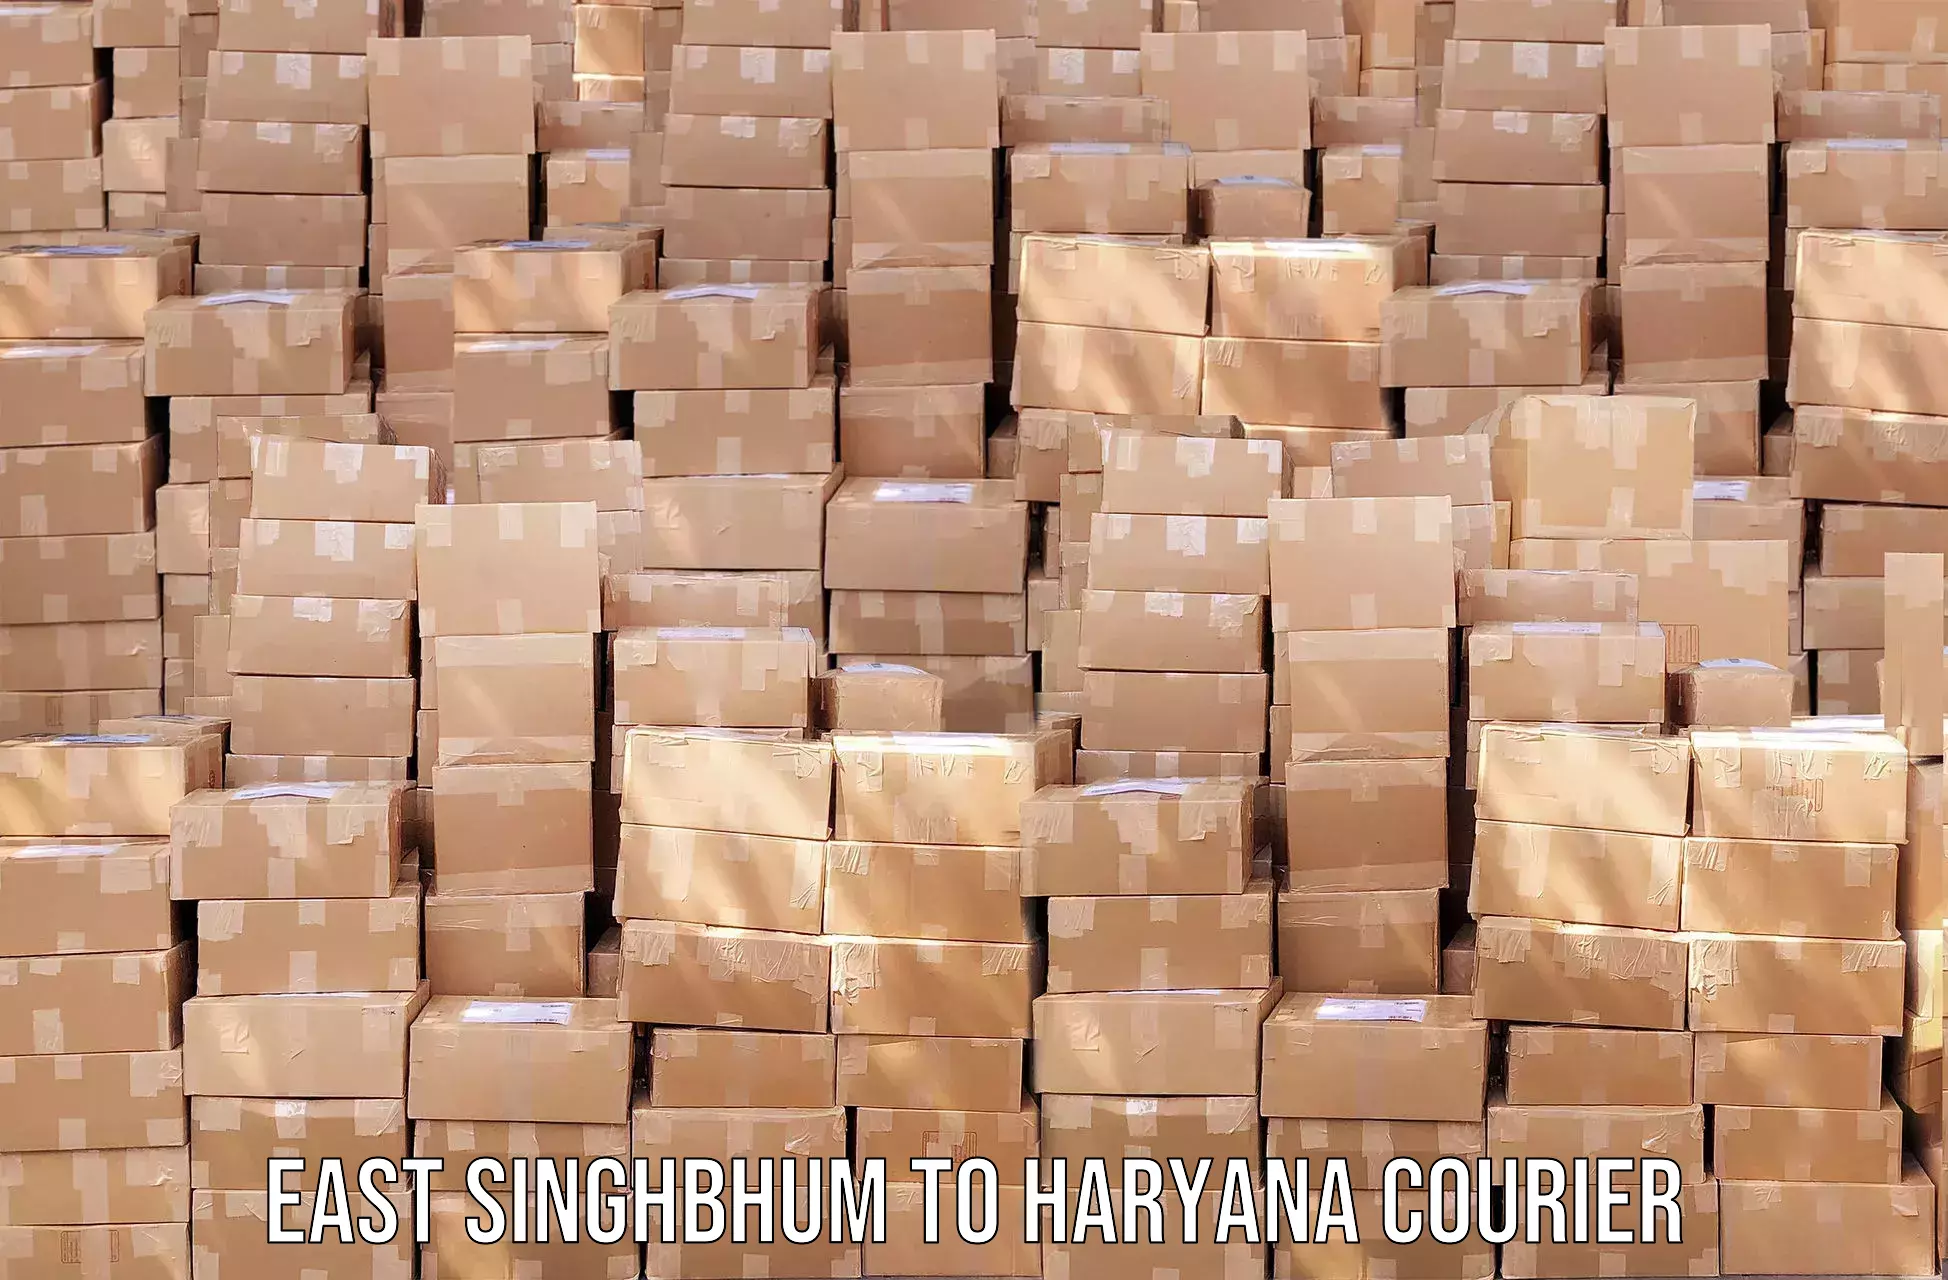 Affordable shipping rates East Singhbhum to Faridabad